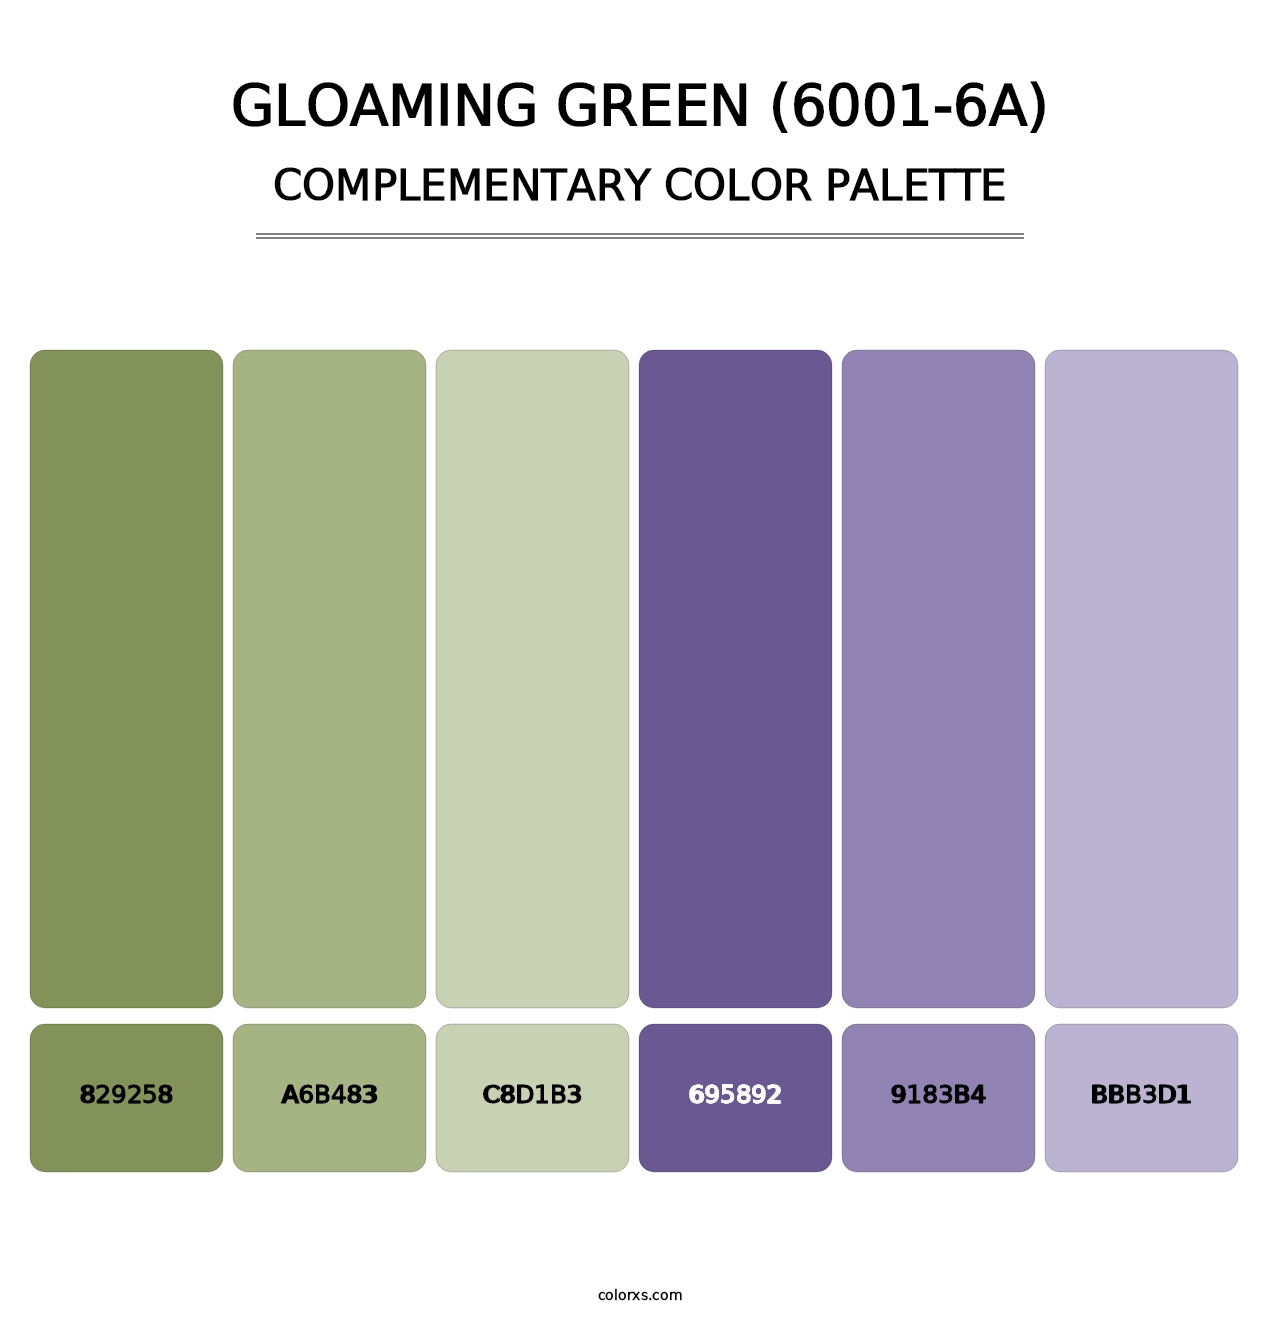 Gloaming Green (6001-6A) - Complementary Color Palette